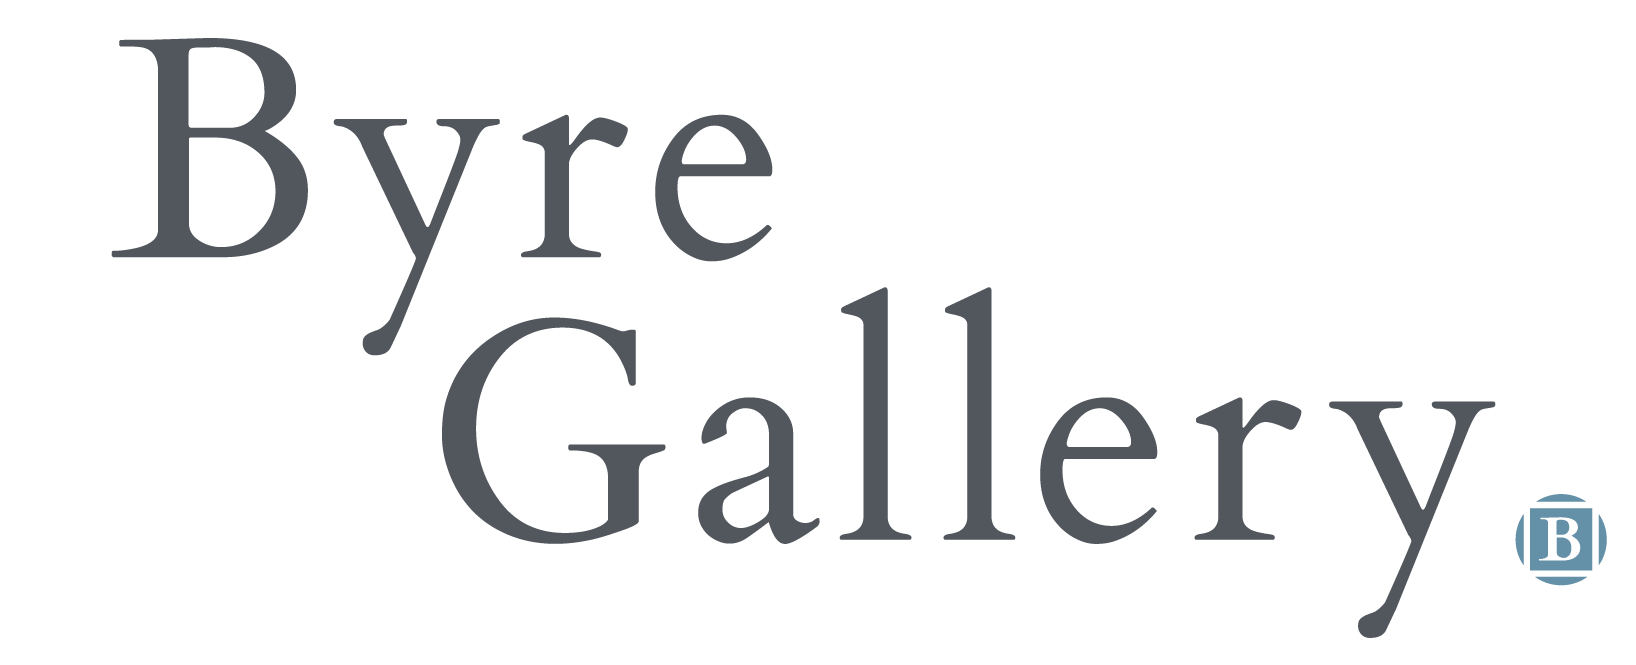 The Byre Gallery